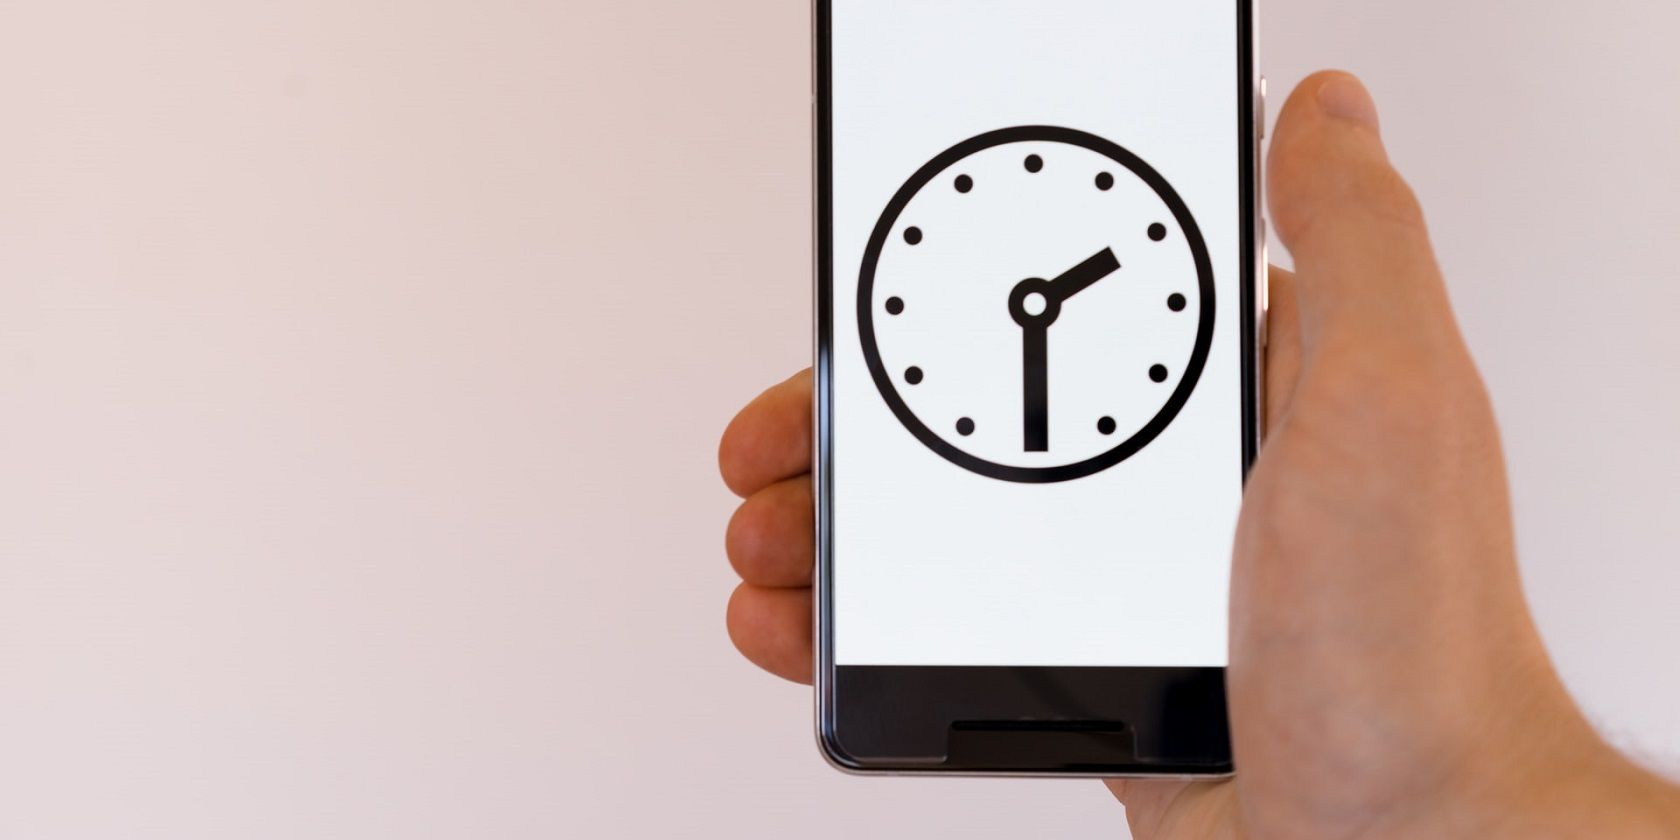 Clock picture on Android screen